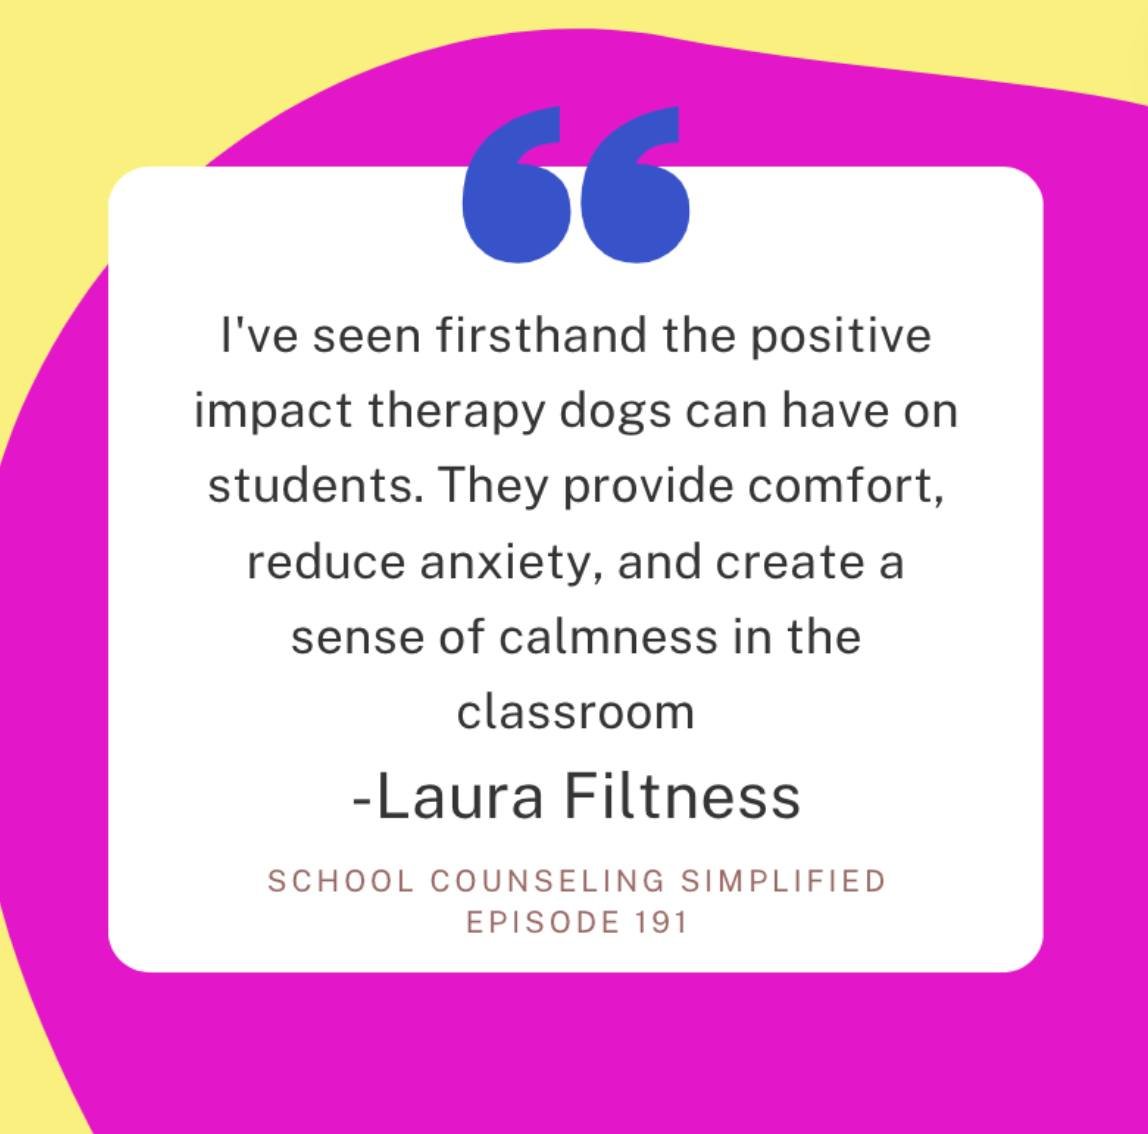 Have you seen the impact of therapy dogs in the classroom? Share your experience below! 

Thanks @pawsitiveschoolcounselor for joining me!